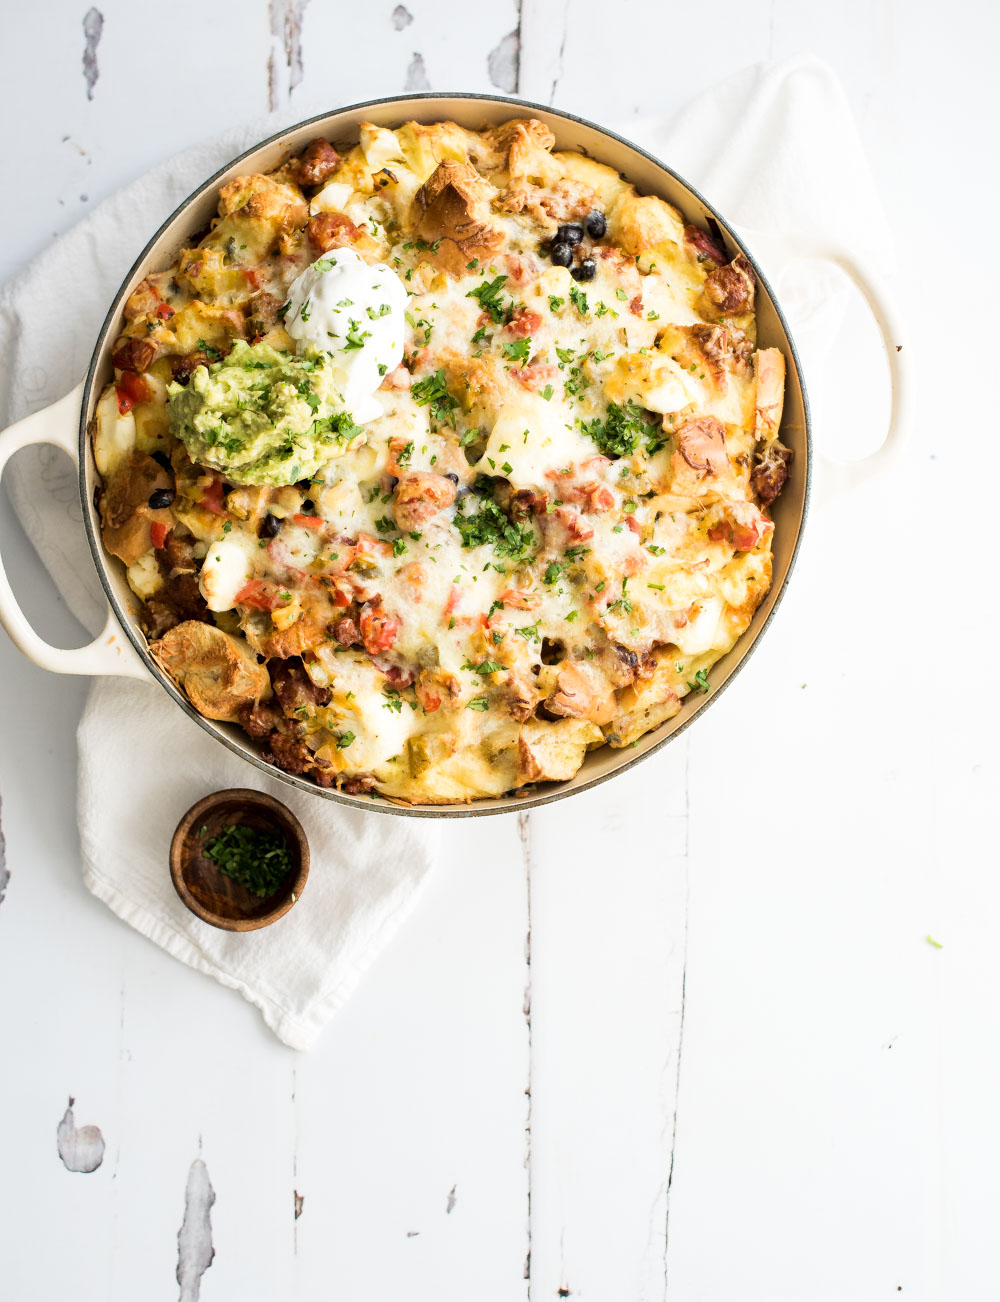 Put a large fun twist on your next breakfast casserole with this huevos rancheros breakfast strata. It's popping with flavor and perfect for a crowd!